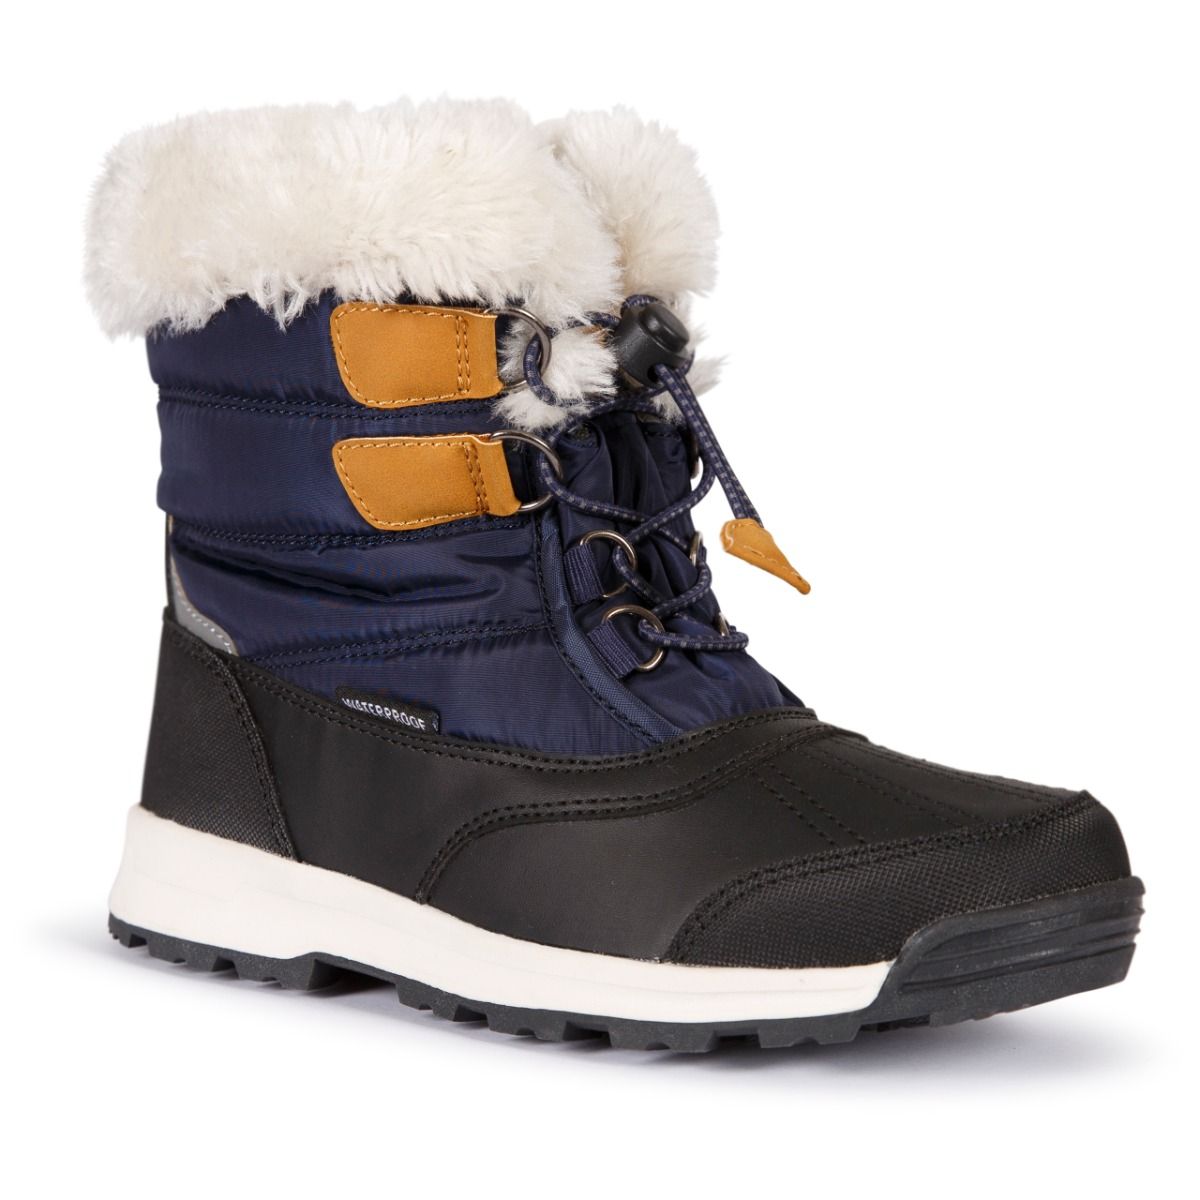 Ratho Youth Waterproof Snow Boots